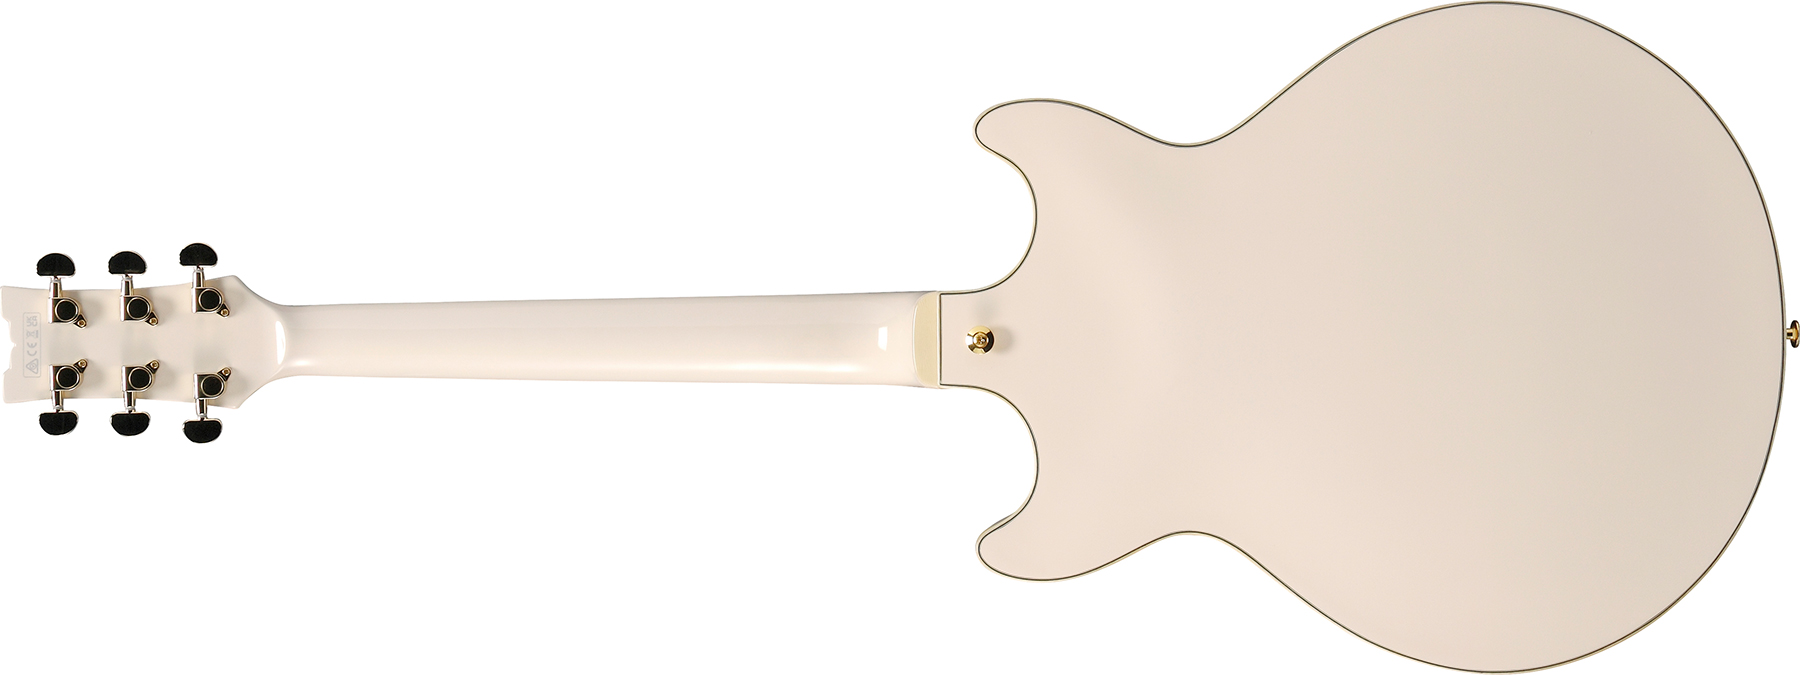 Ibanez Amh90 Iv Artcore Expressionist 2h Ht Eb - Ivory - Hollow-body electric guitar - Variation 1